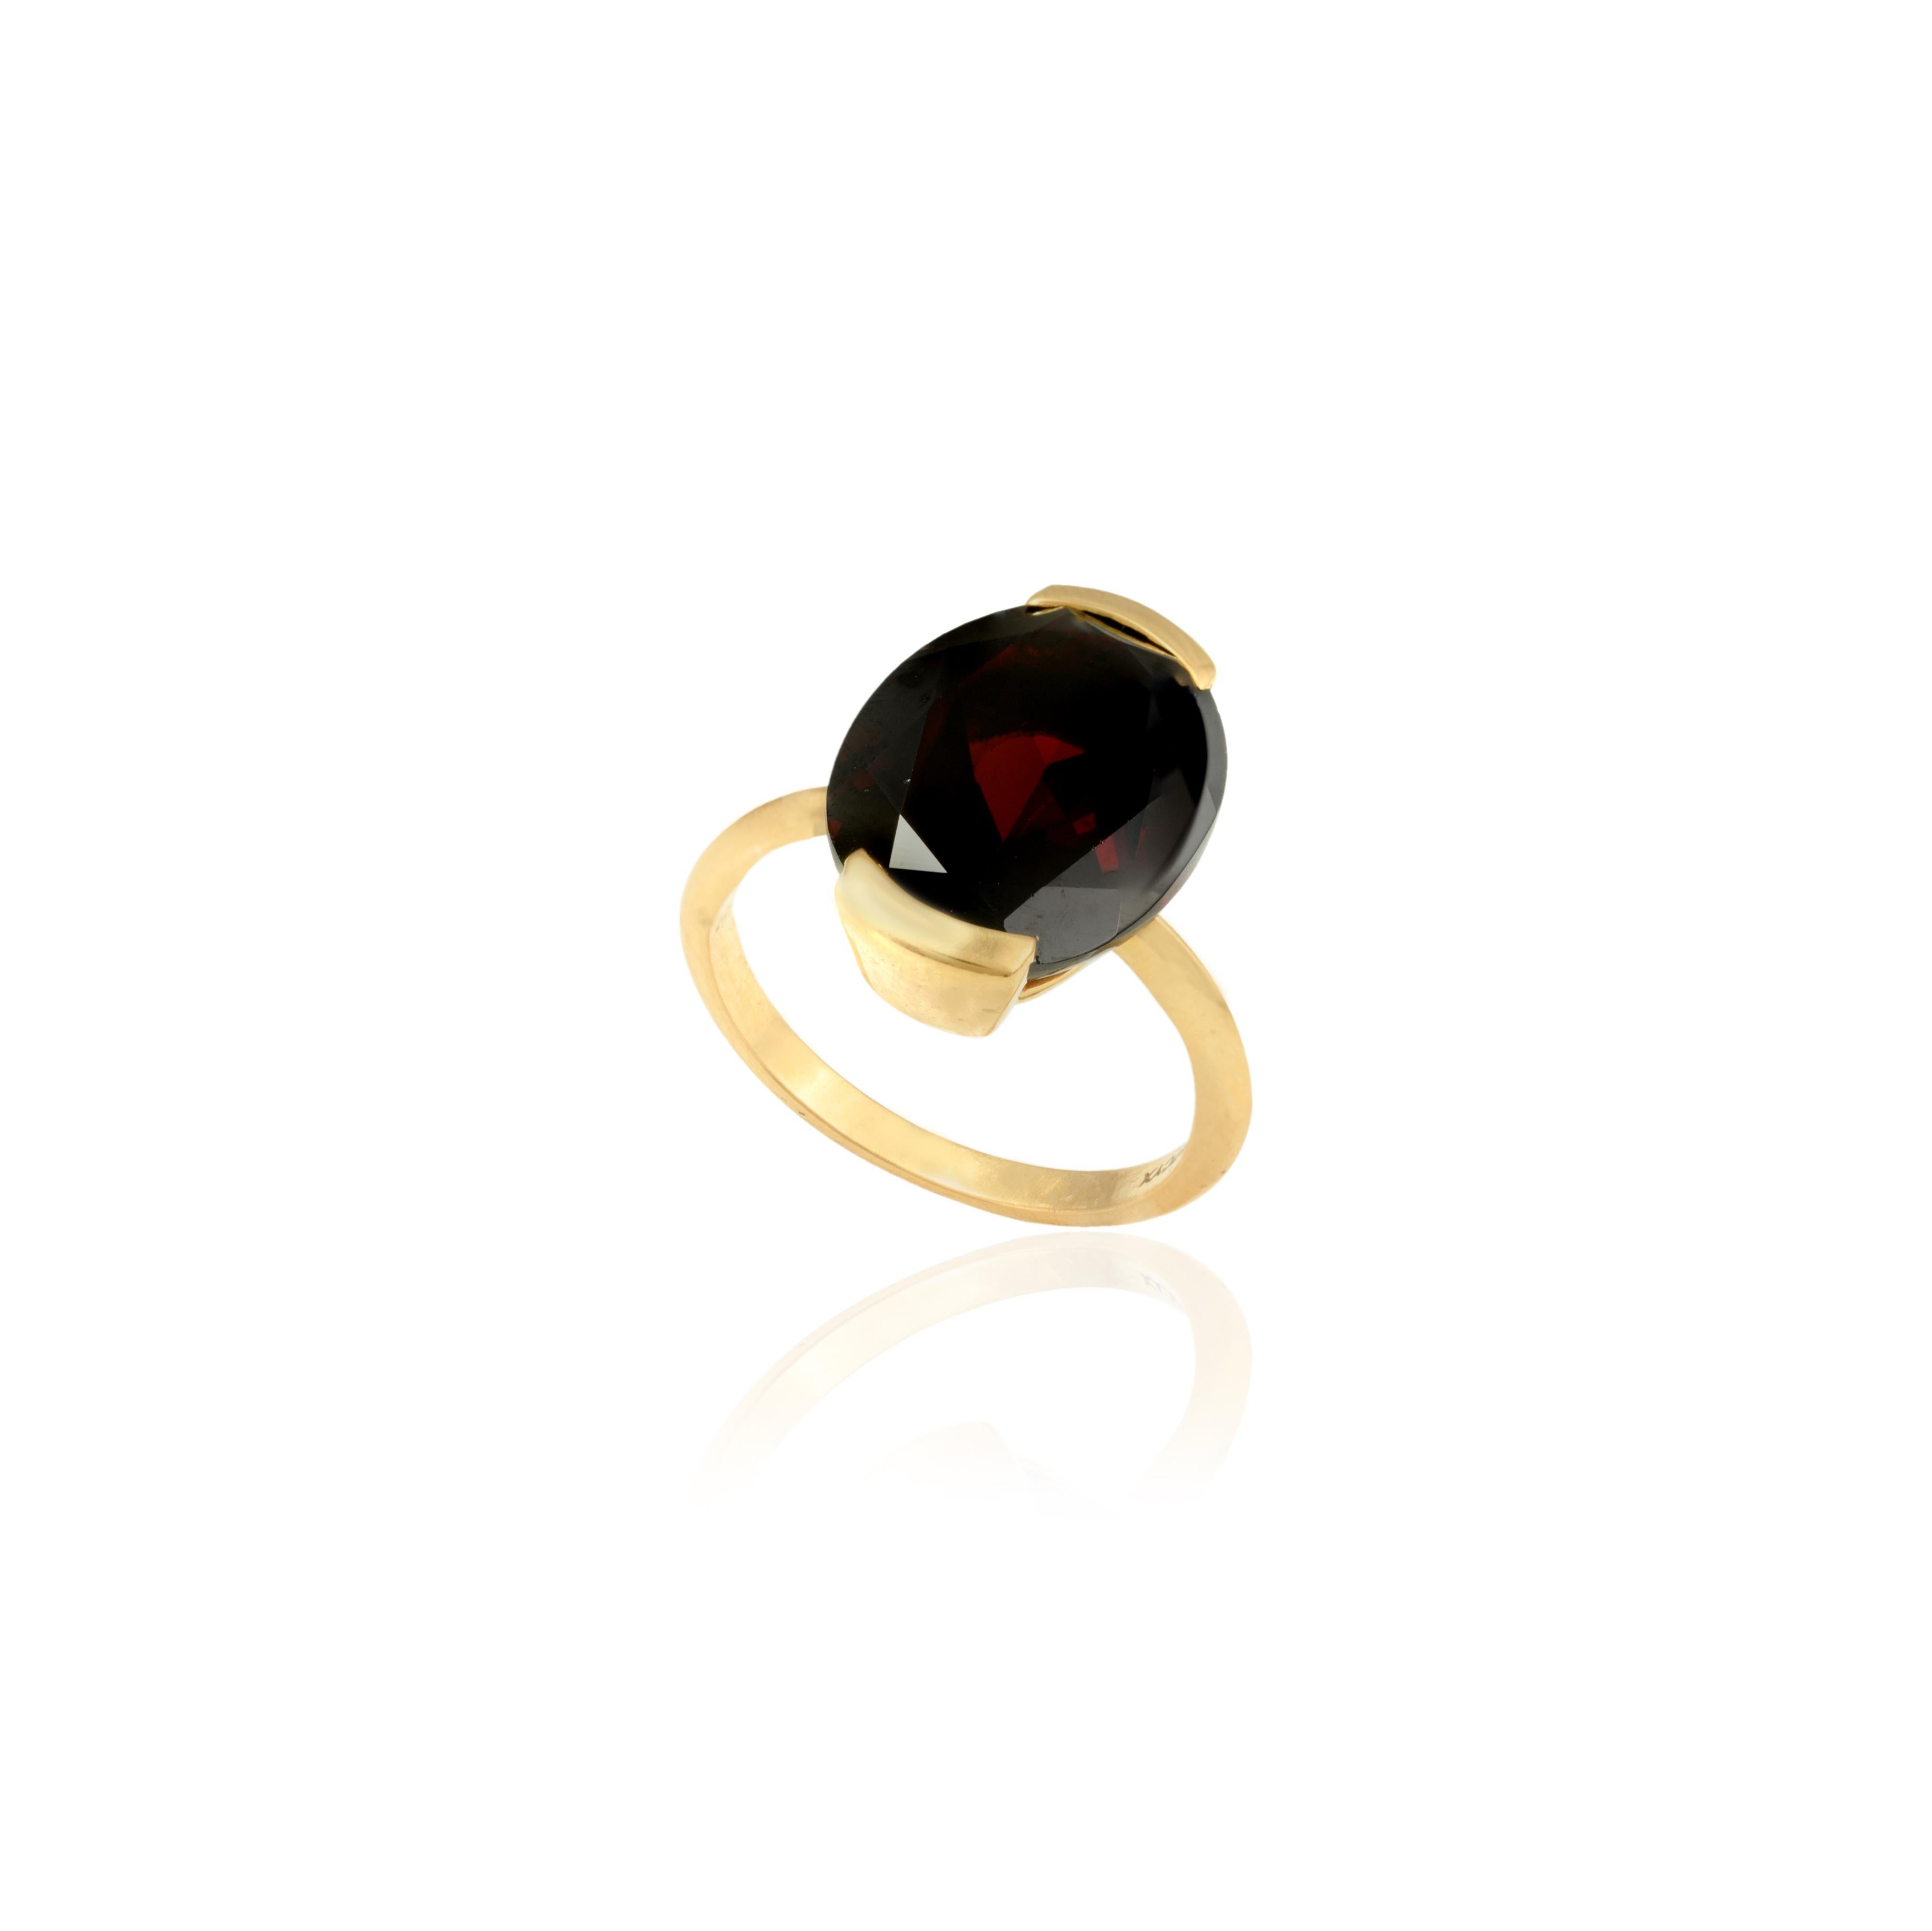 For Sale:  12.5 Carats Natural Garnet Single Stone Ring Set in 18k Solid Yellow Gold 9